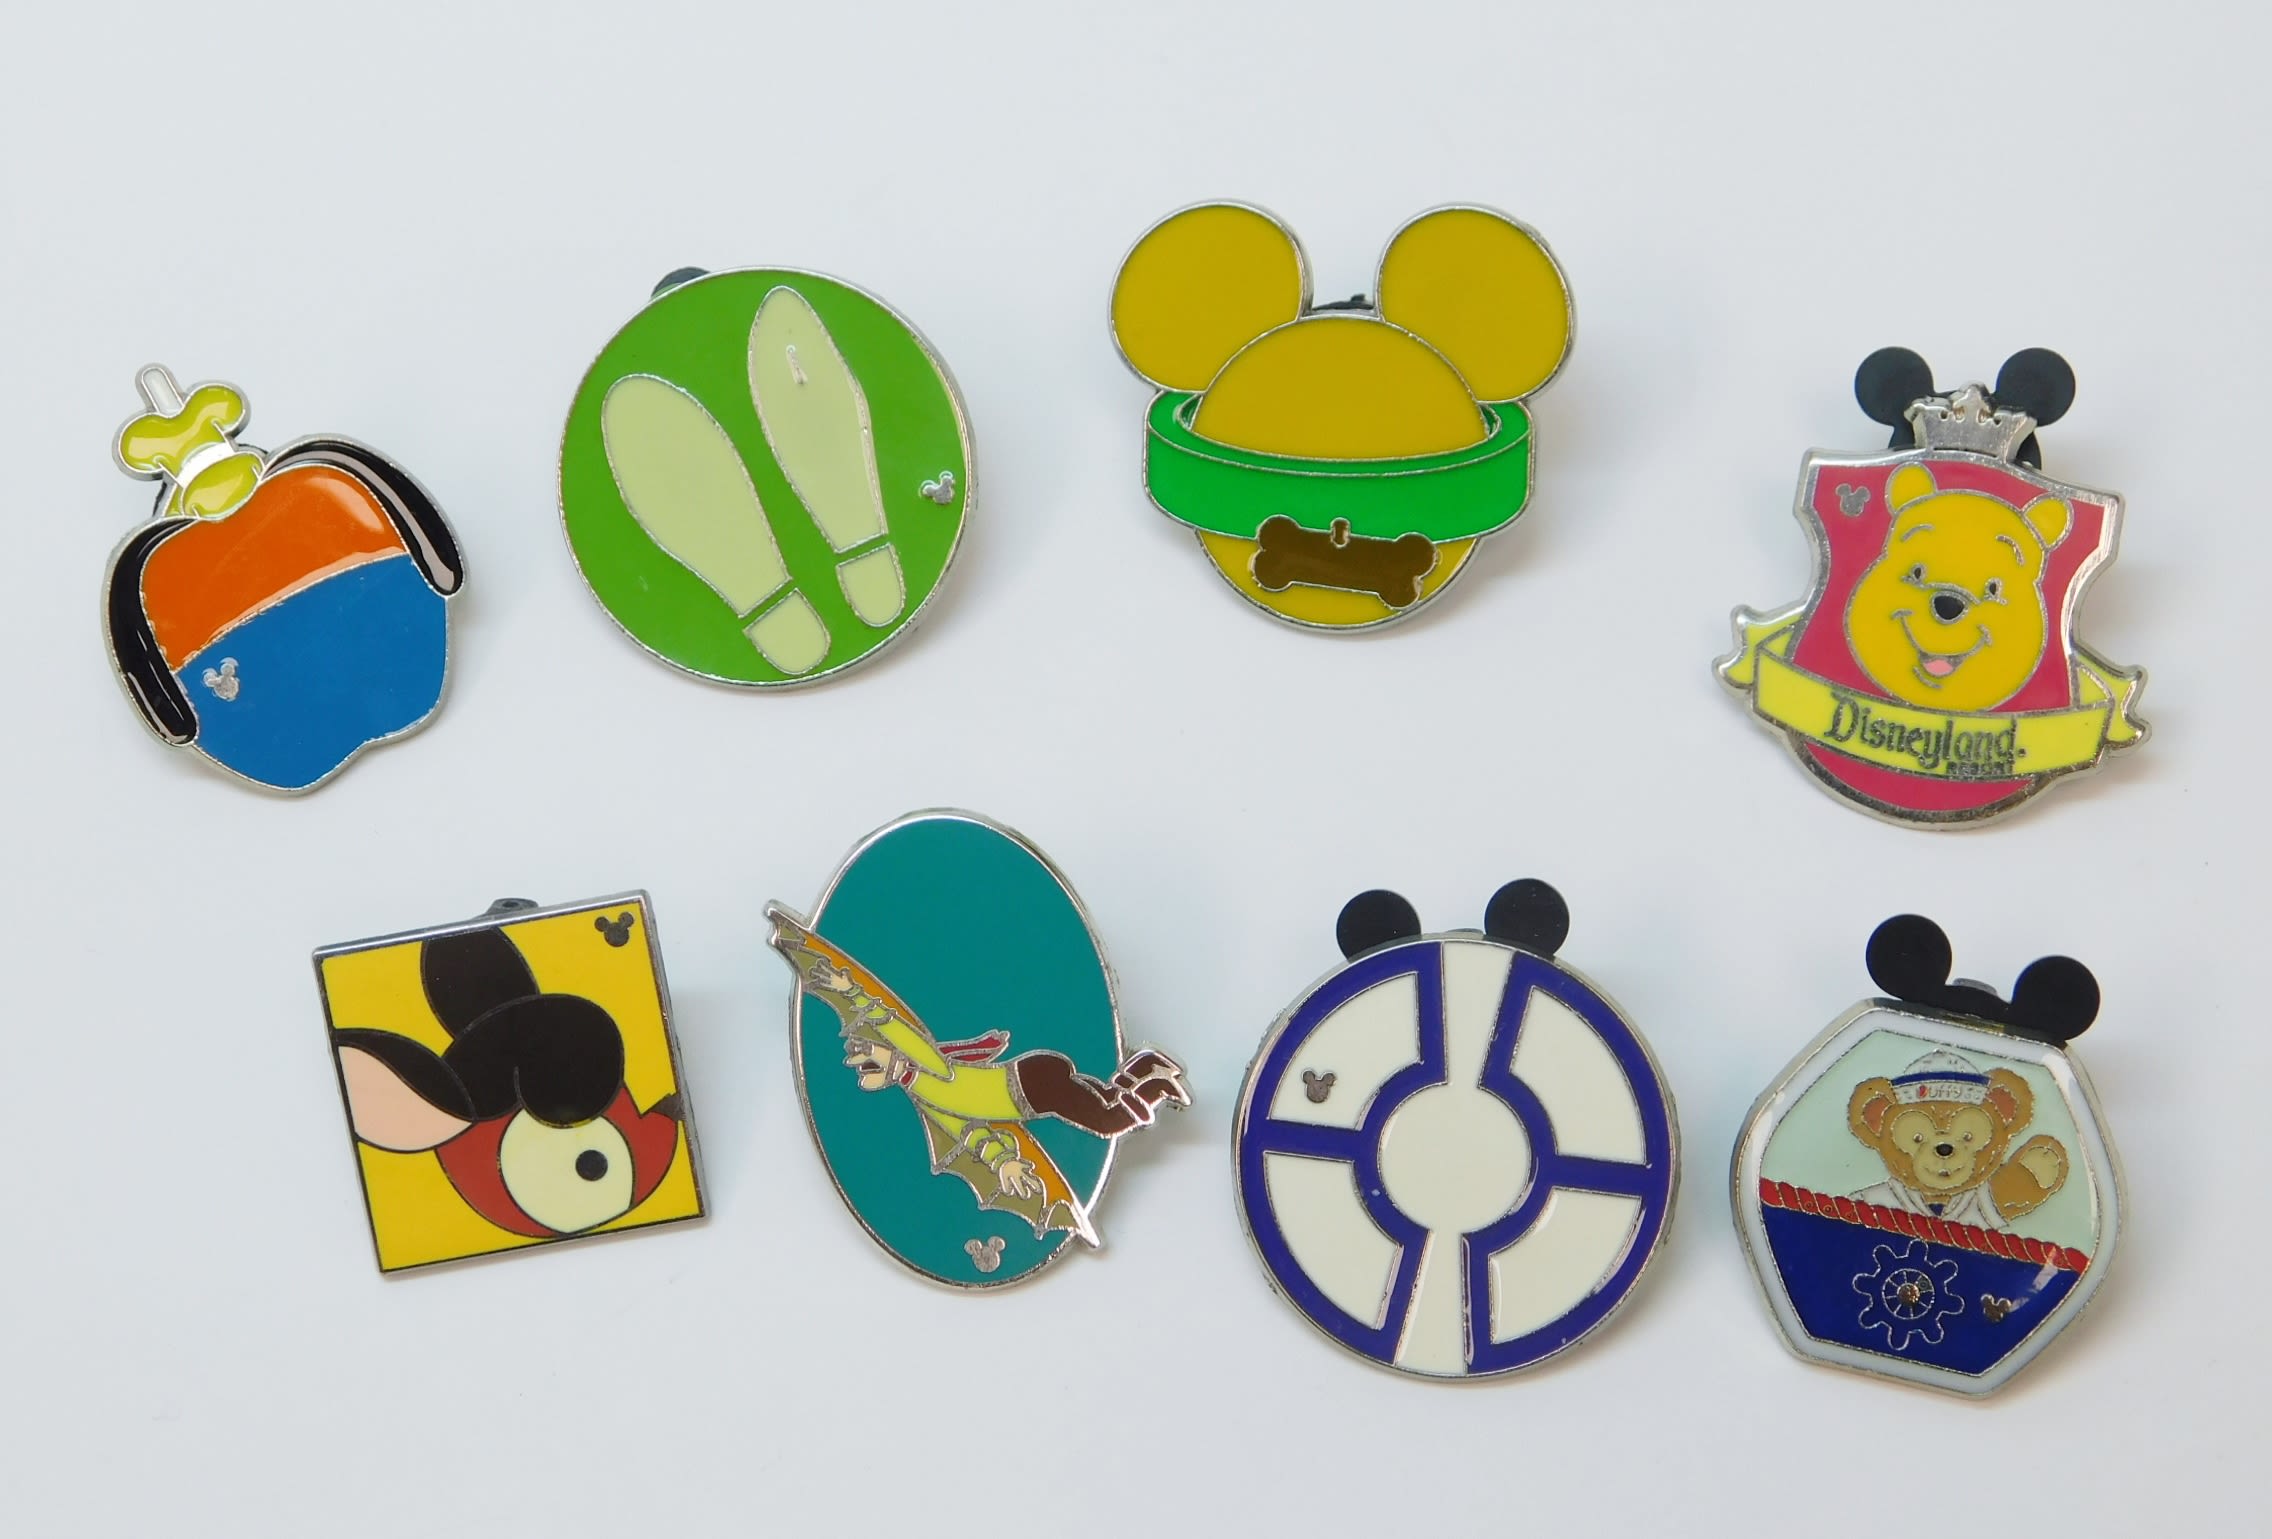  Disney Pin Lot - Random Theme Trading Pins - Assorted Foreign  and Limited Edition Pins - Great for Collecting and Trading at Disney Parks  - birthdays (35) : Clothing, Shoes & Jewelry